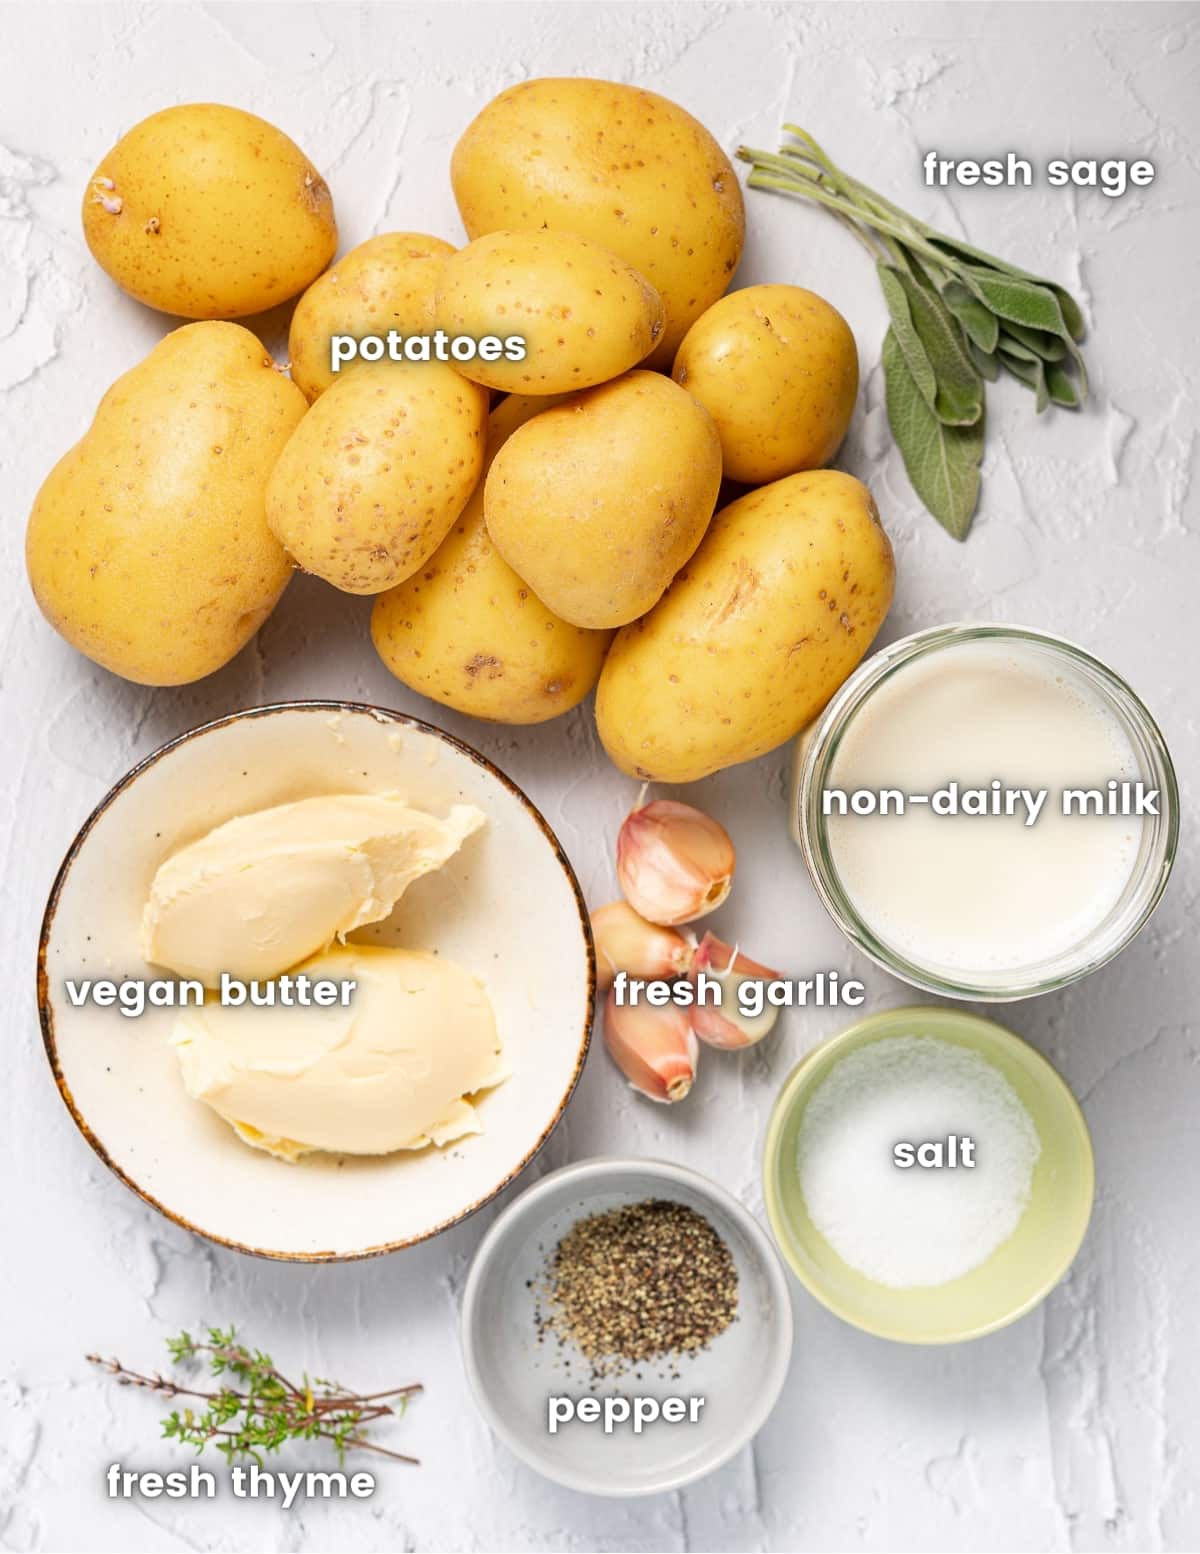 ingredients for vegan mashed potatoes as per the listed ingredients